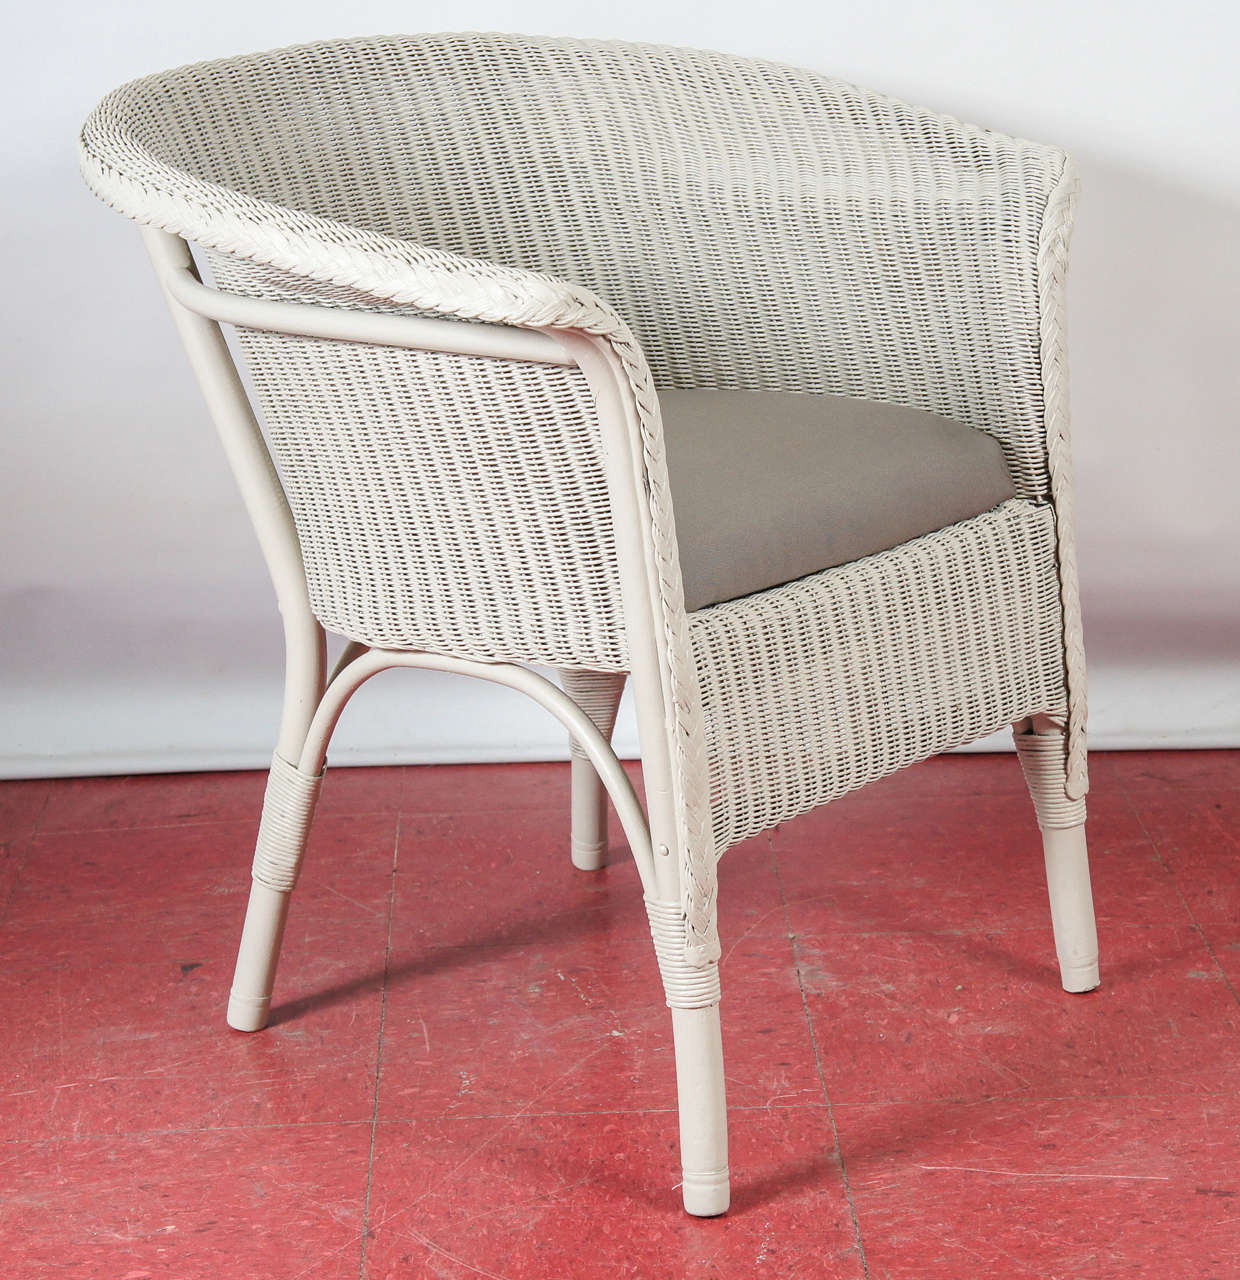 An original Lloyd Loom armchair. This looks like a wicker chair but the woven fabric is made of paper.  The material for these chairs and furniture was invented by Lloyd a 100 years ago associated with the Art Deco movement. The furniture is made